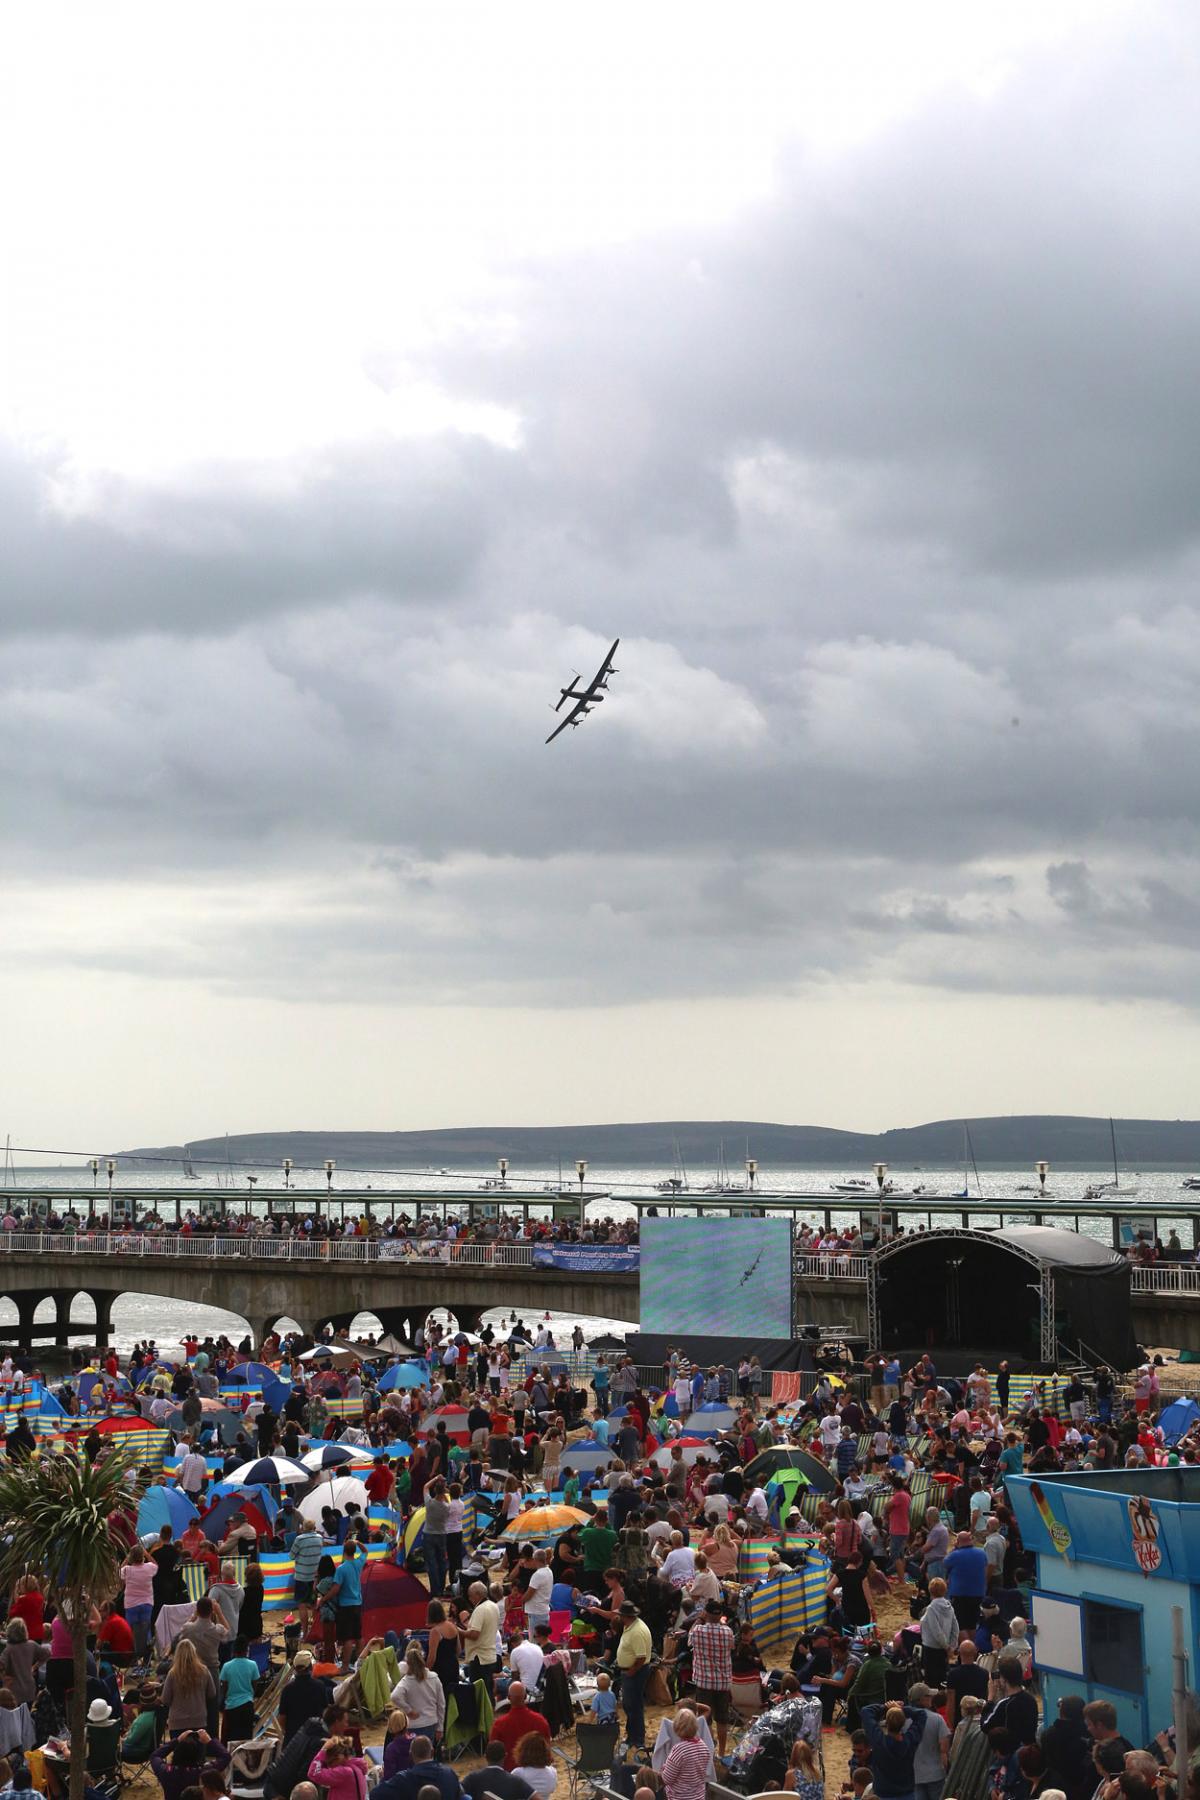 Check out all our pictures from day three of the Bournemouth Air Festival 2014 on Saturday, August 30. Photo by Jon Beal